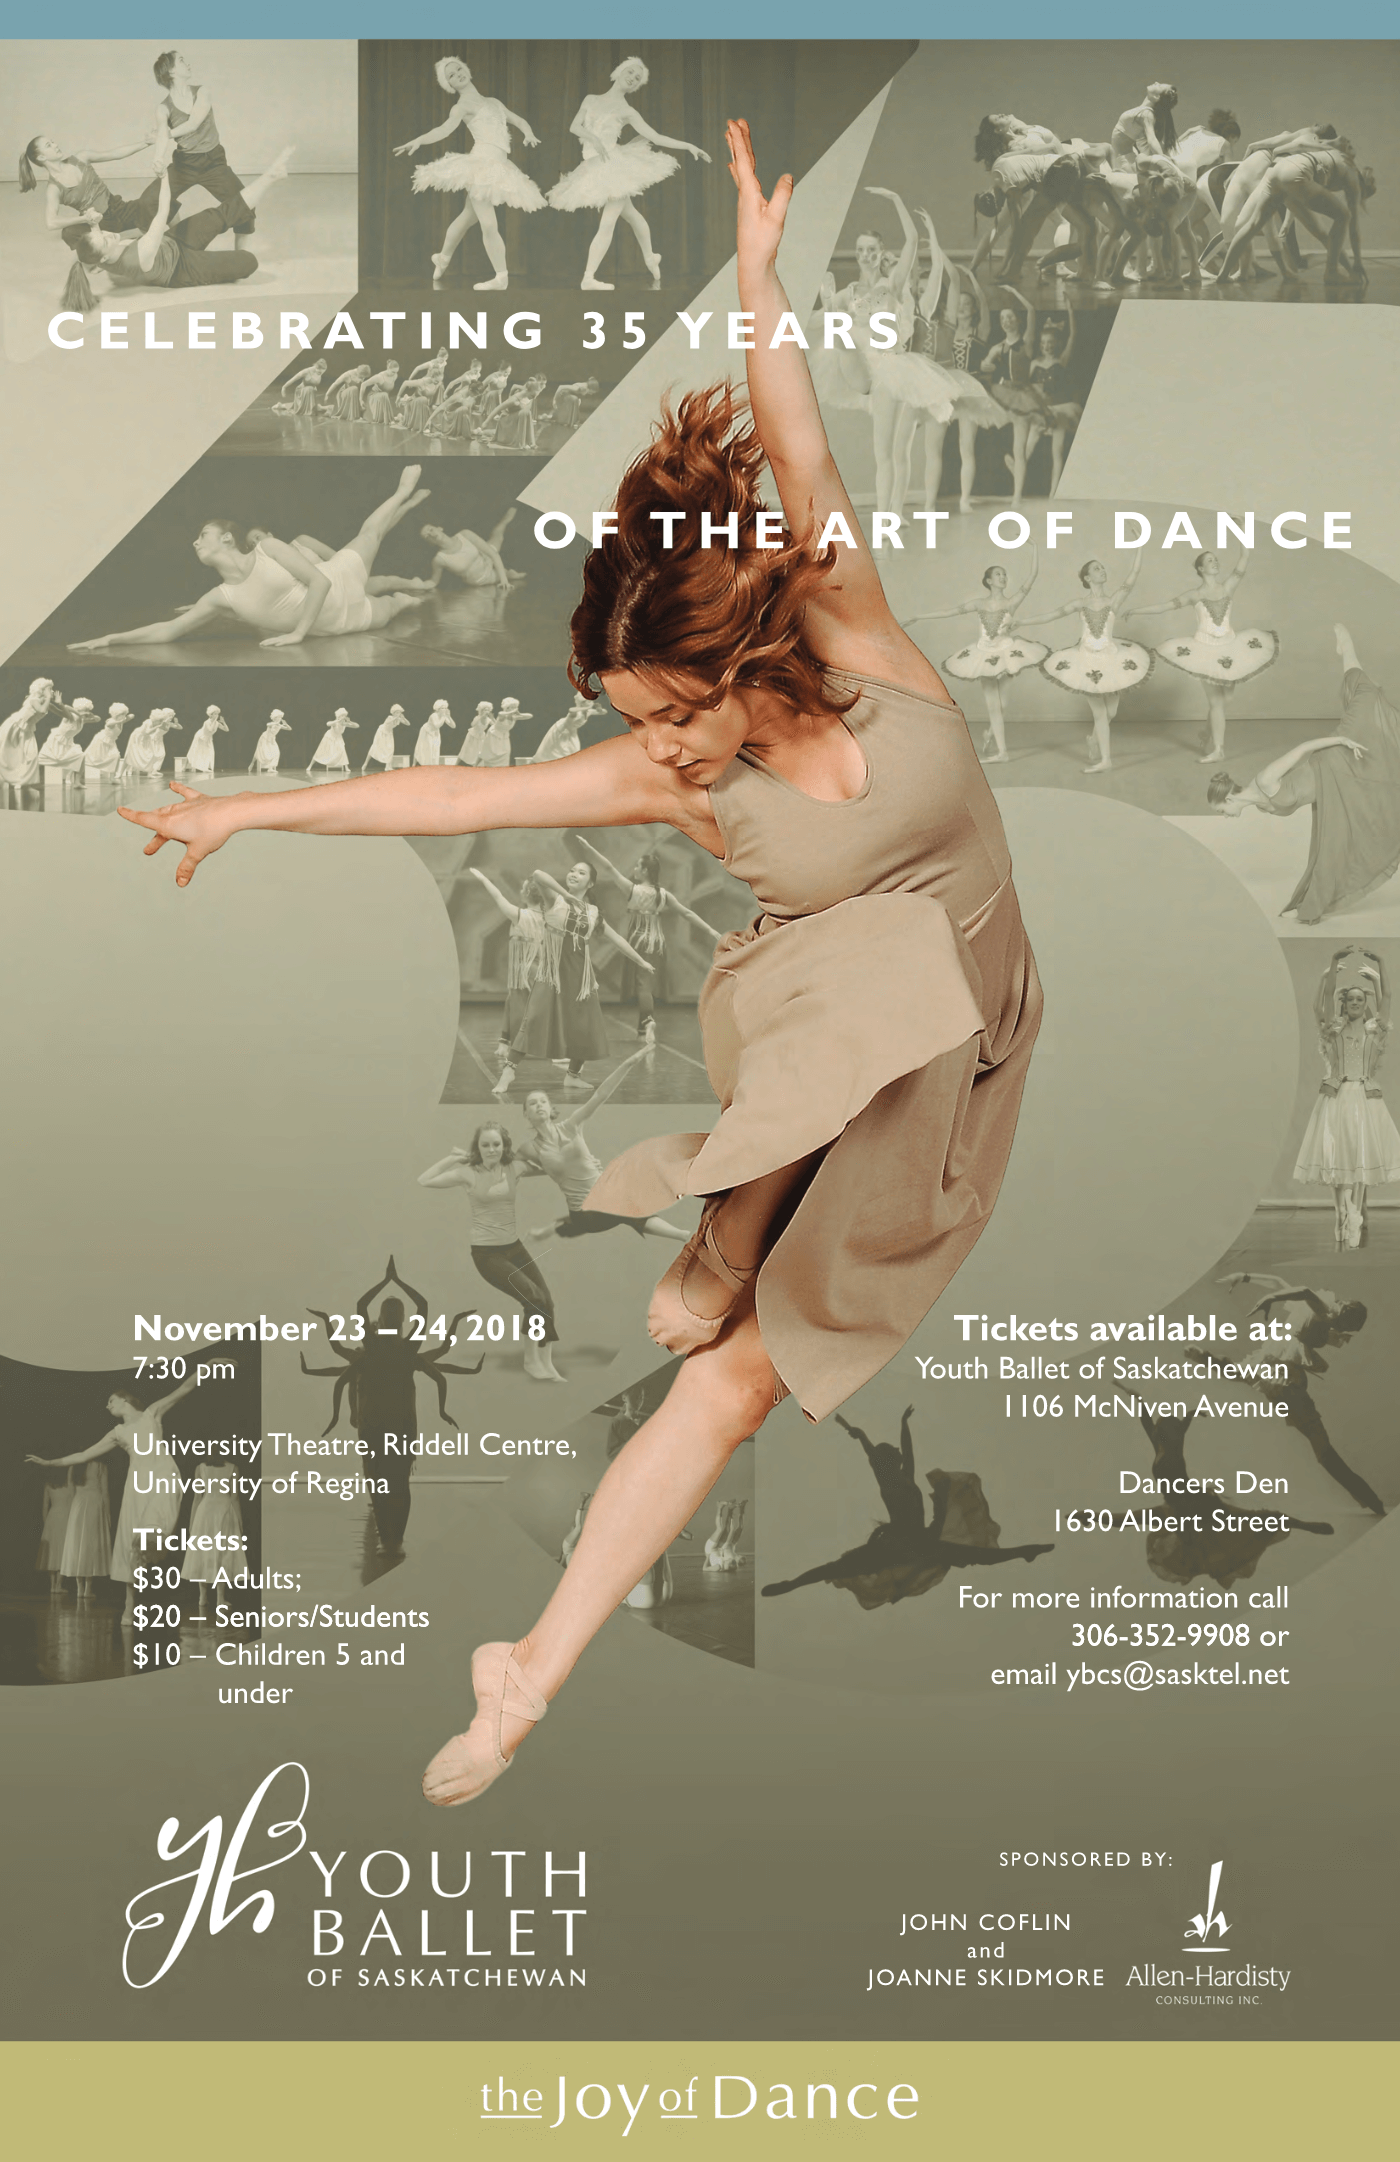 Celebrating 35 Years of the Art of Dance